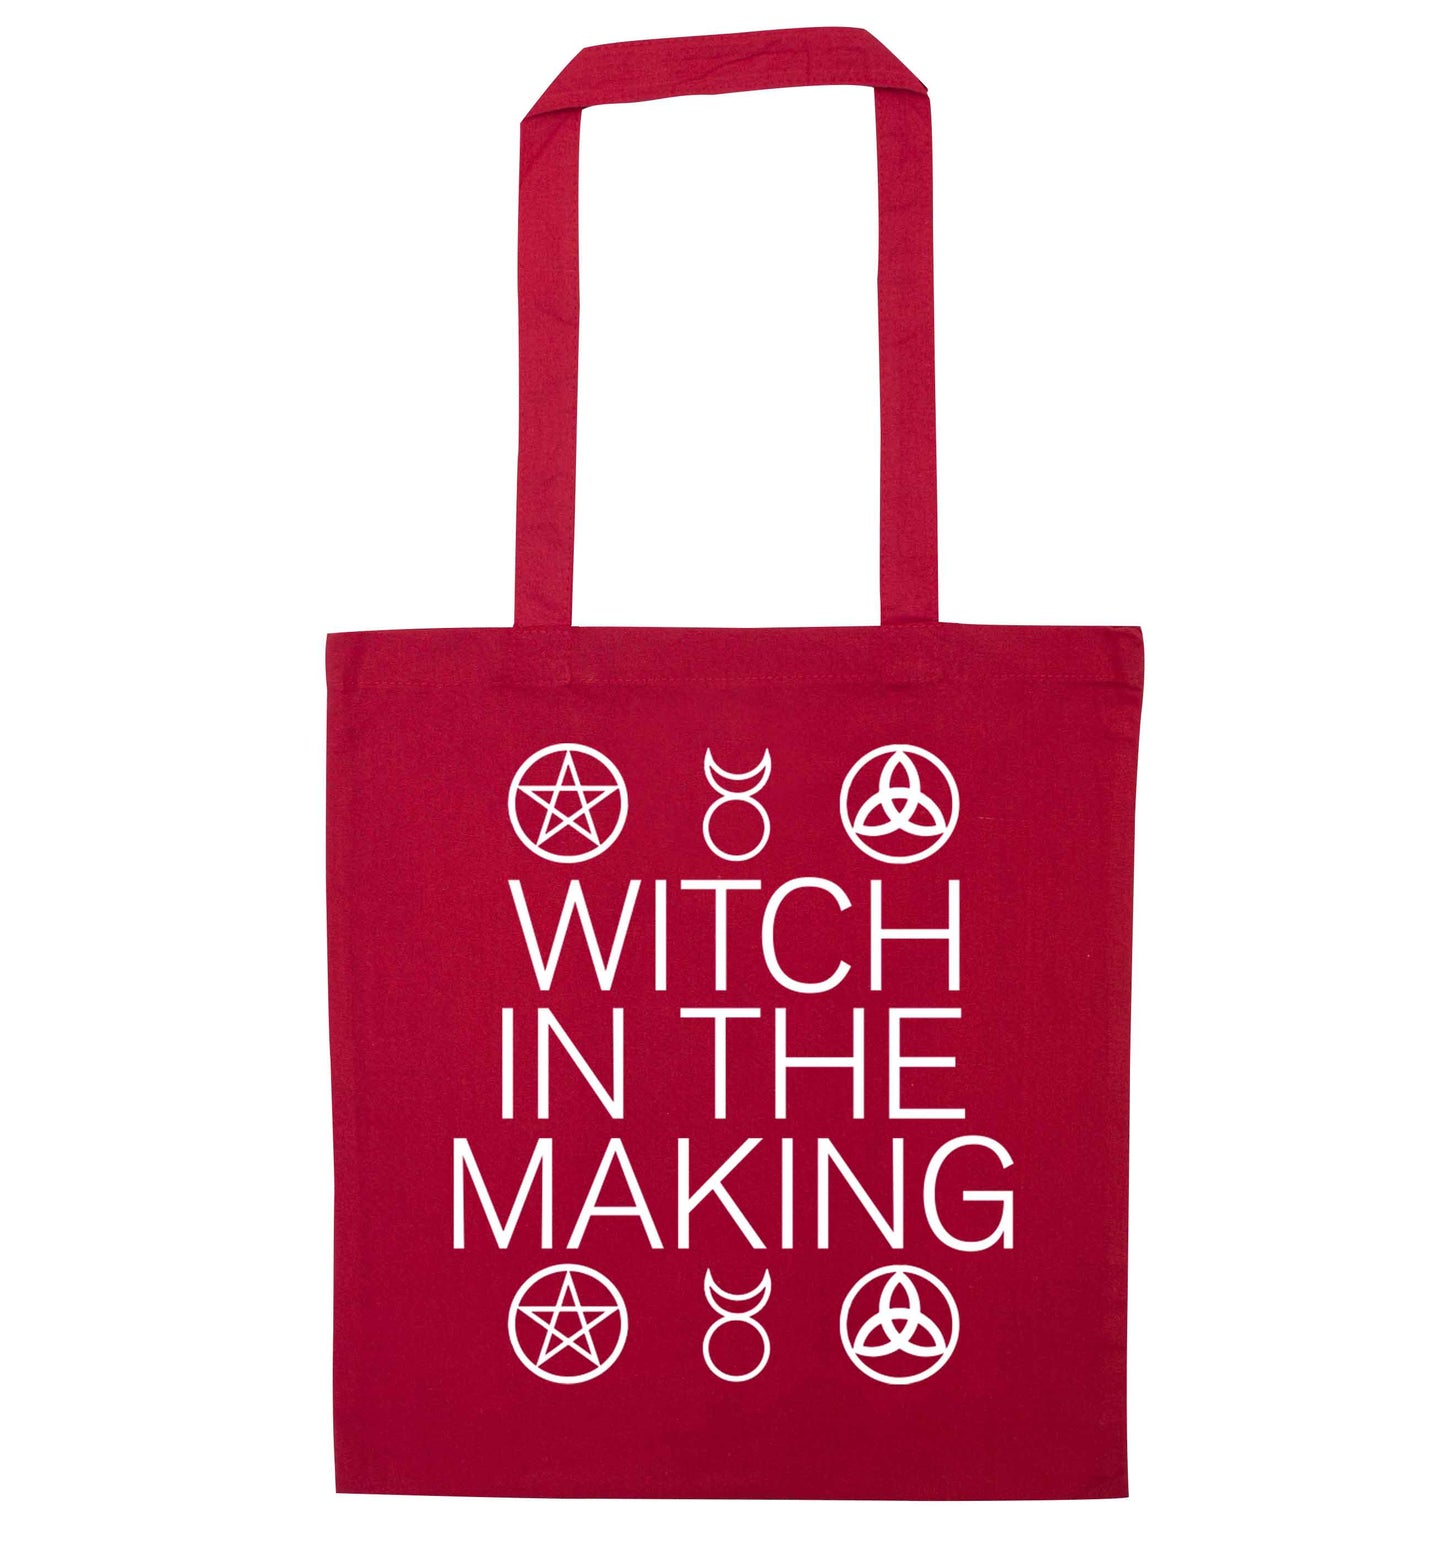 Witch in the making red tote bag